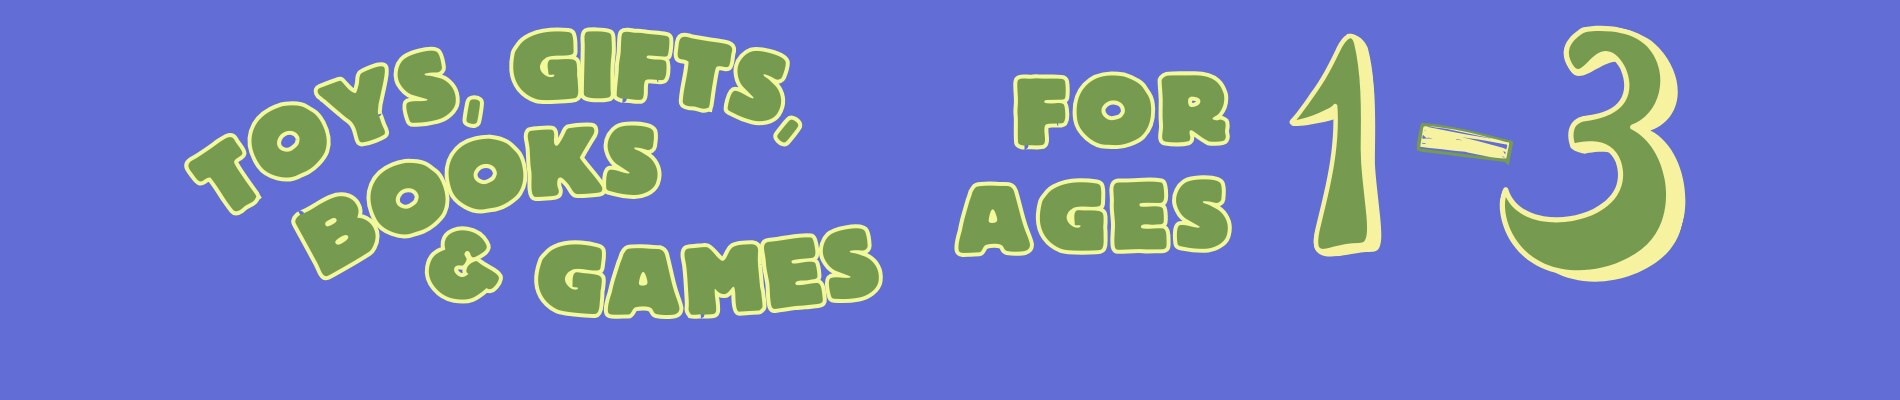 Blue background with green text that reads "Toys, Gifts & Games for ages 1-3"